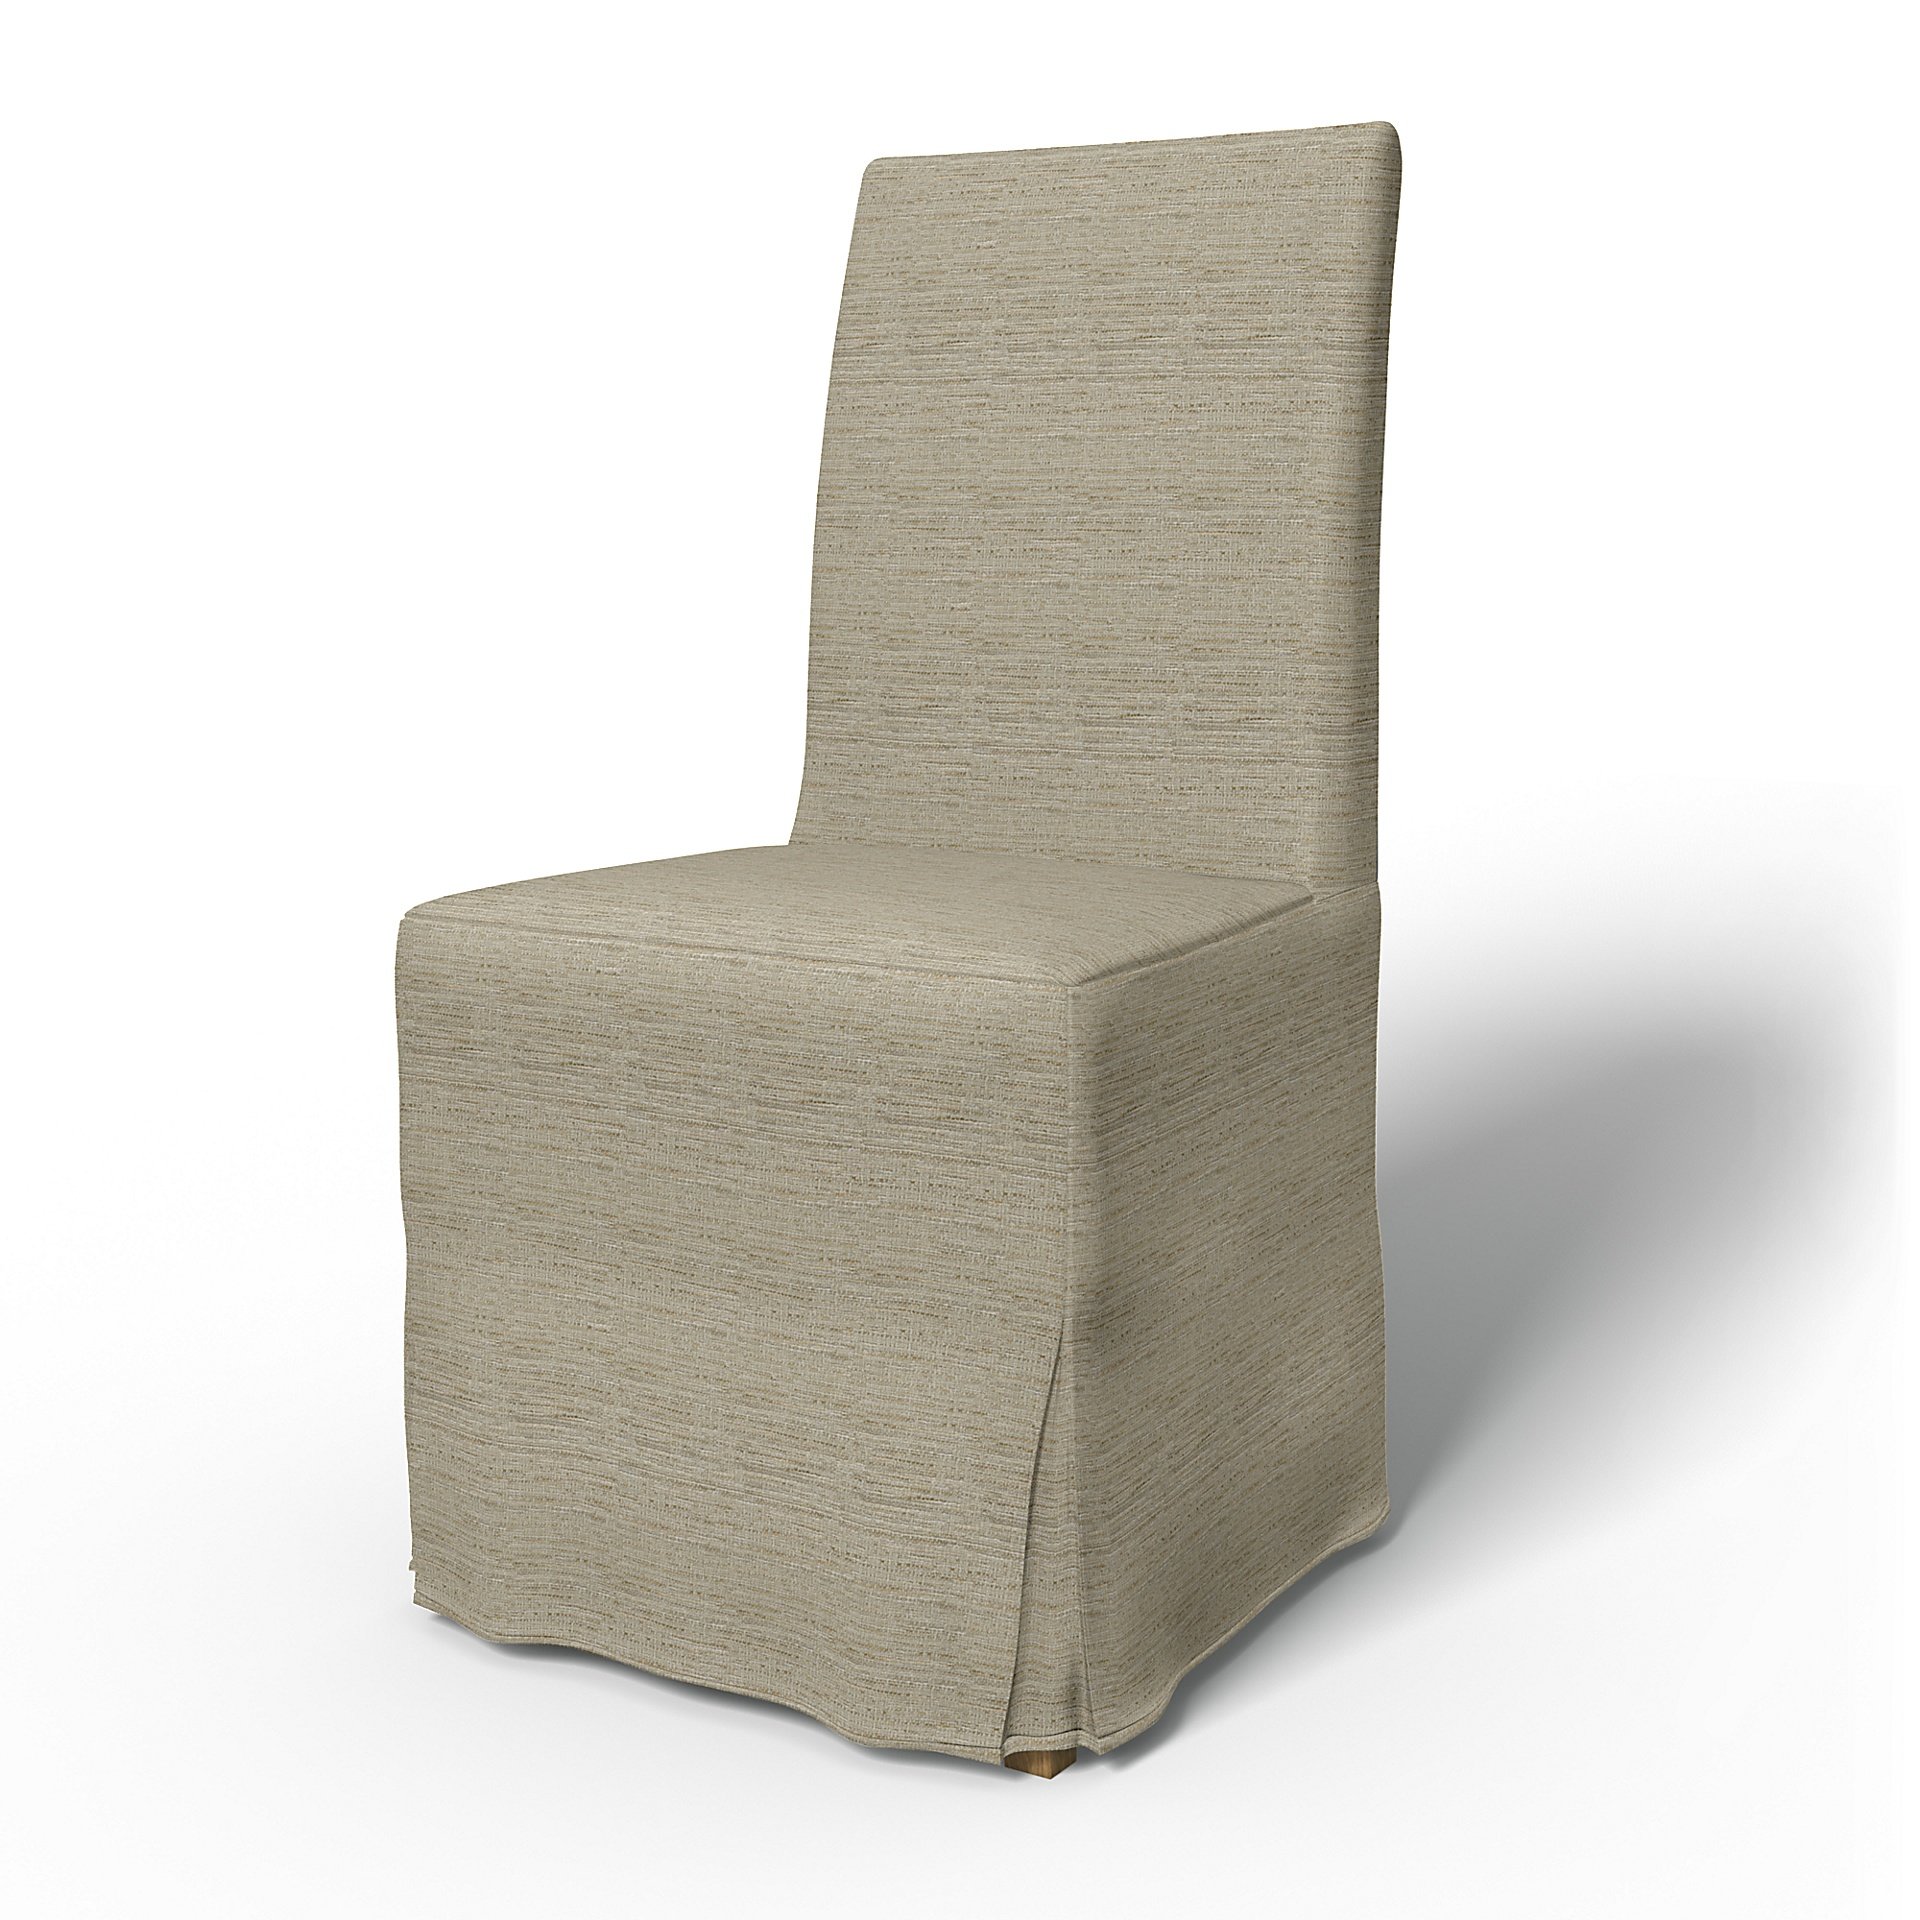 IKEA - Henriksdal Dining Chair Cover Long Skirt with Box Pleat (Standard model), Light Sand, Boucle 